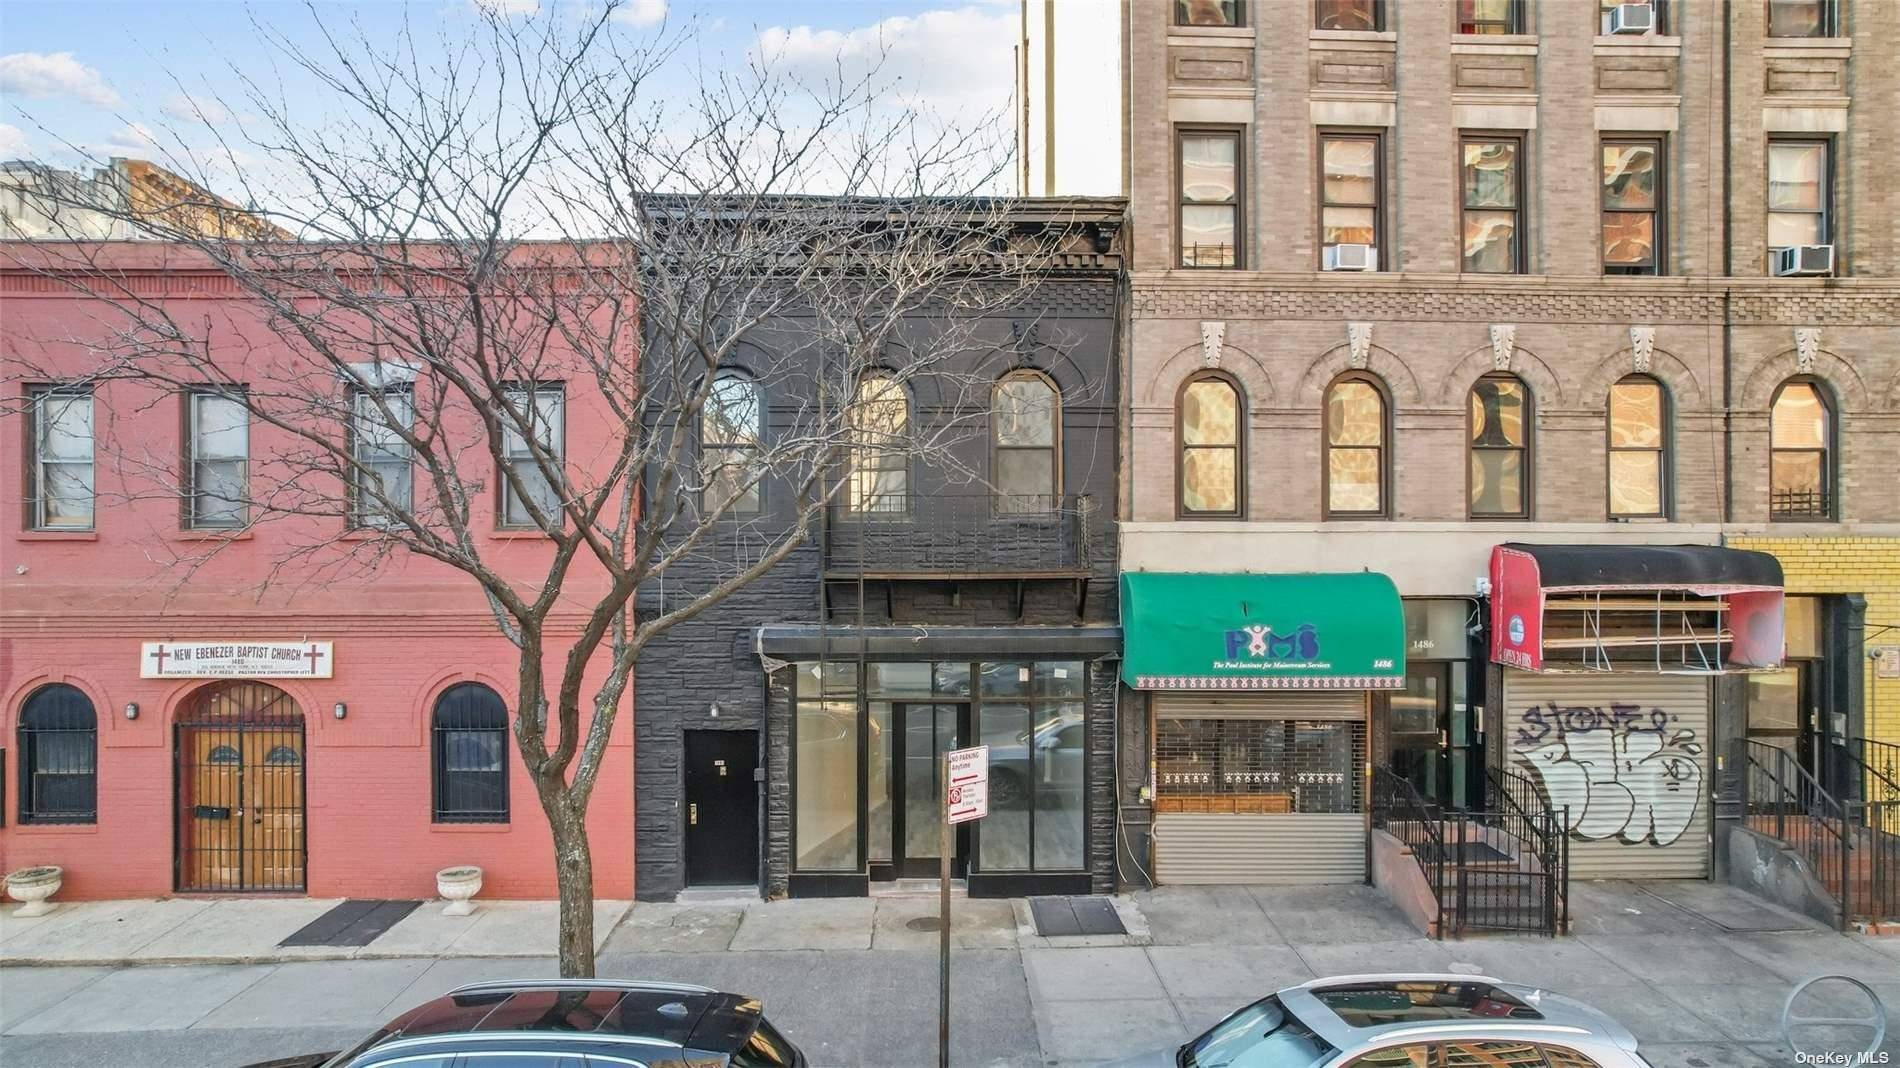 Welcome to this prime investment opportunity in the heart of Central Harlem.